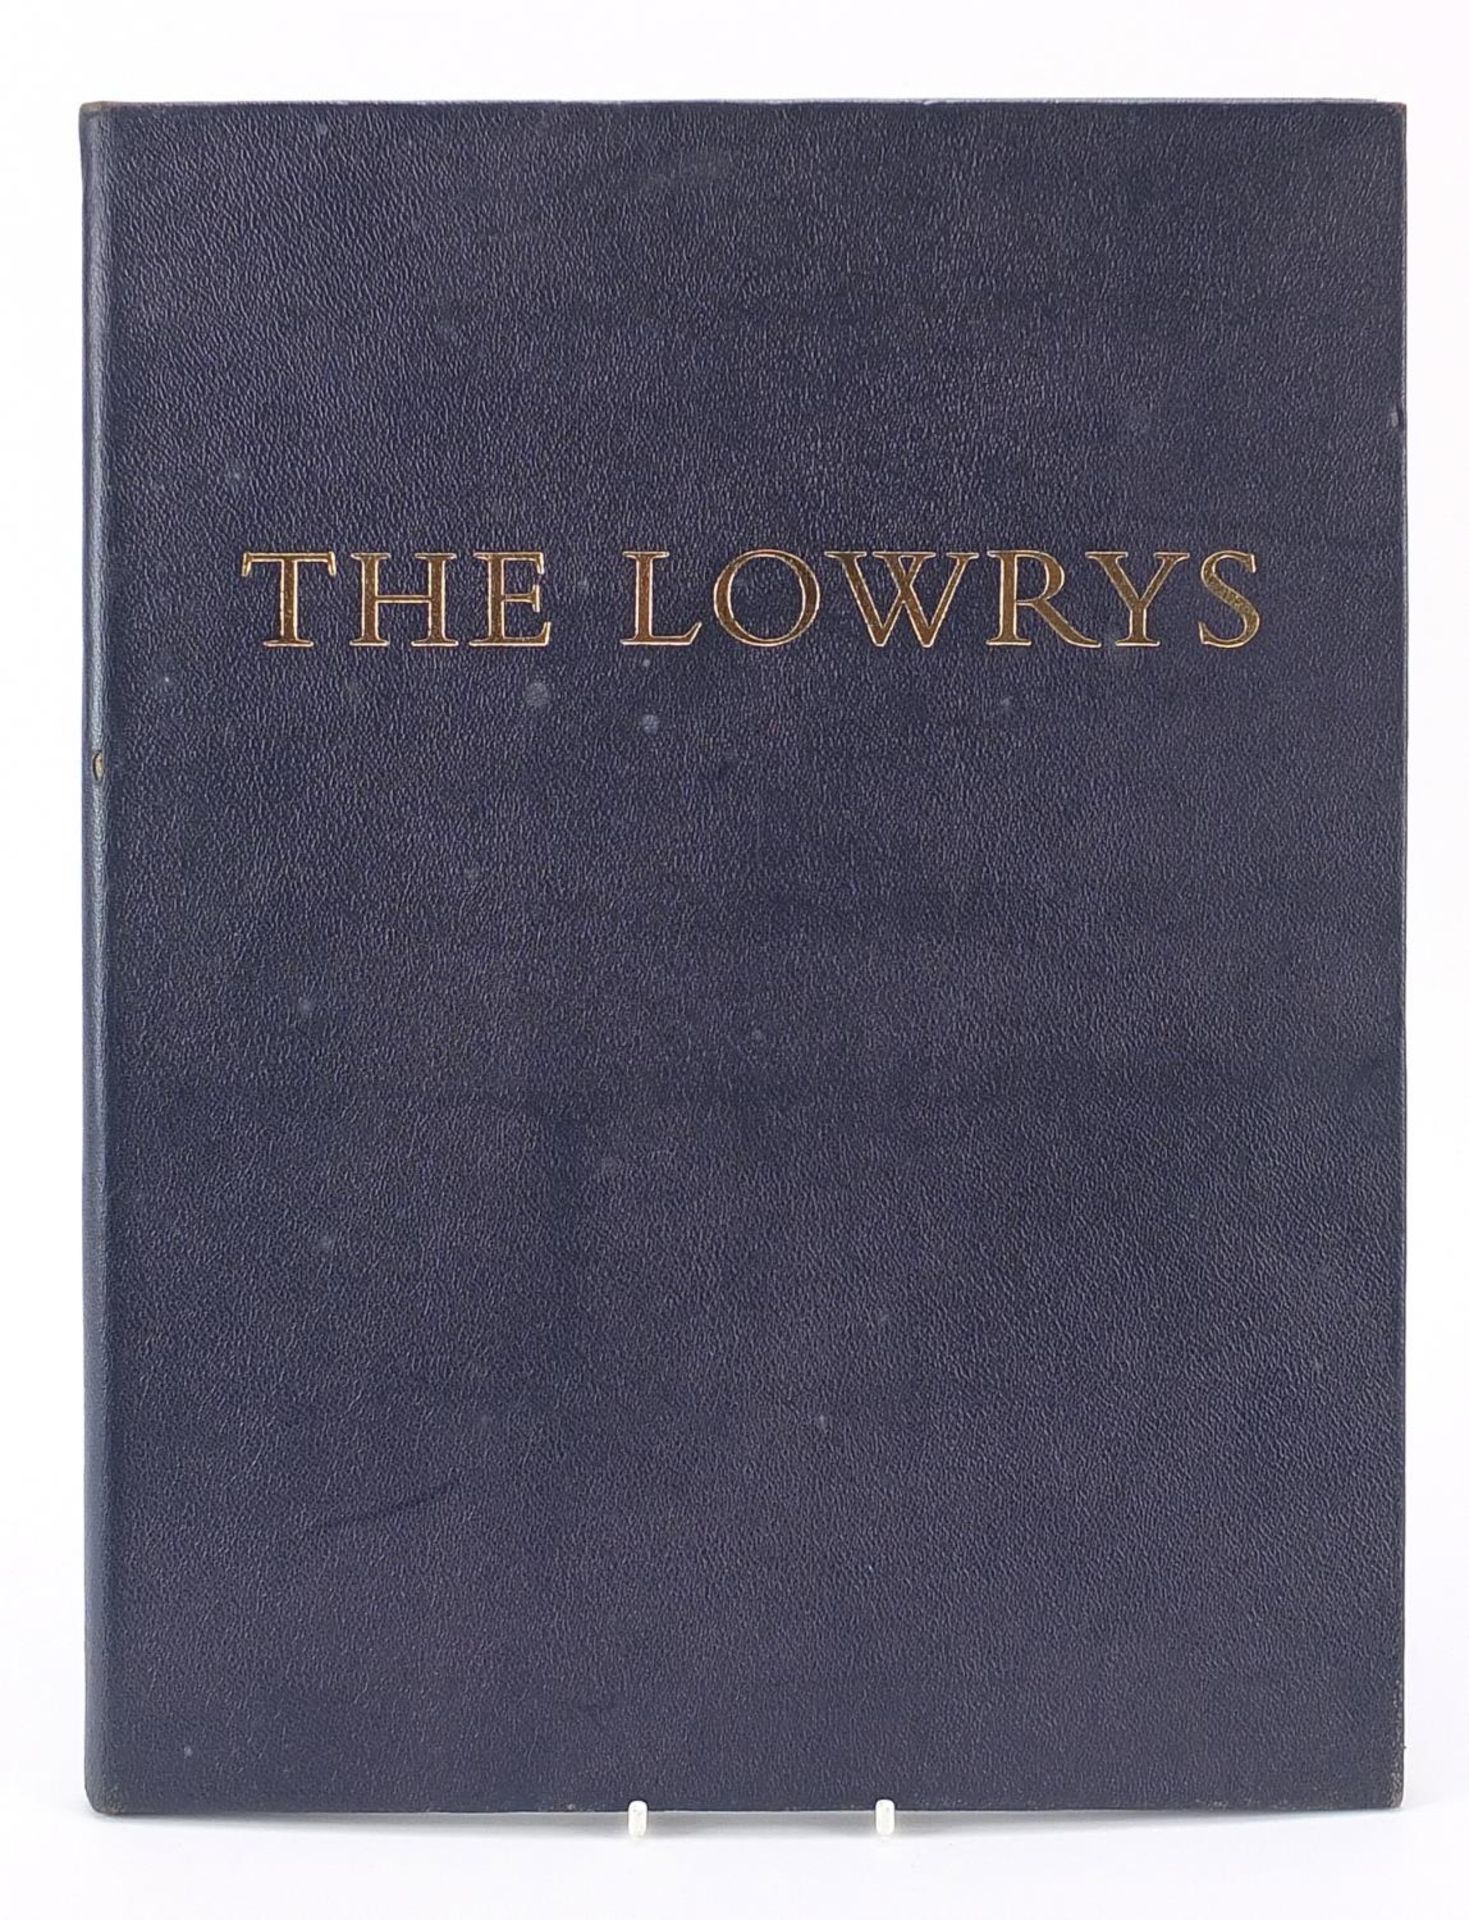 Laurence Stephen Lowry - The Lowrys, set of three pencil signed prints in colour of the artist's - Image 15 of 15